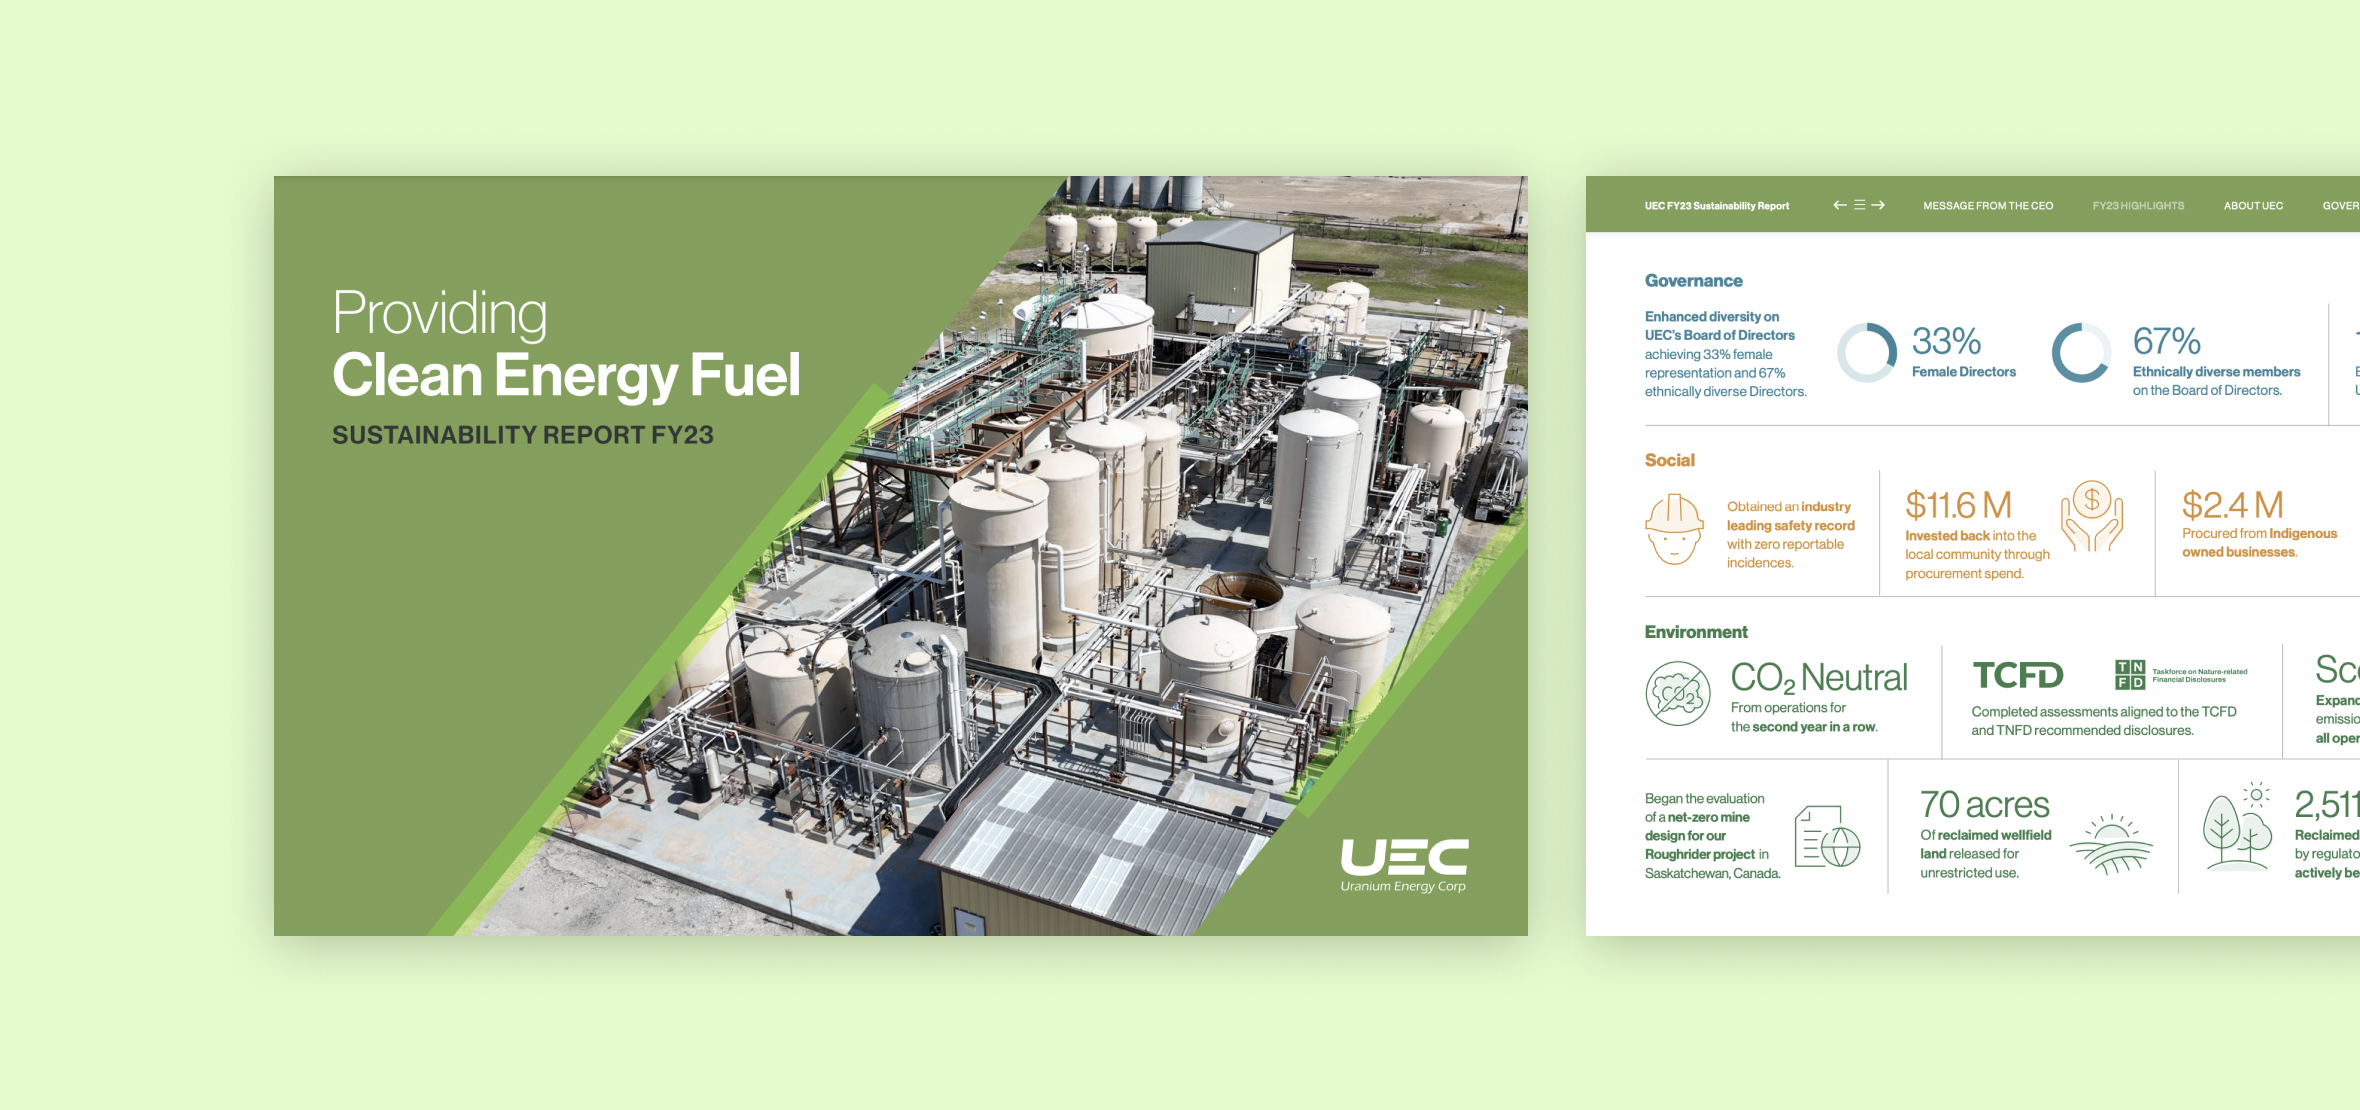 UEC Sustainability - A striking, readable sustainability report for a leading uranium exploration company - Article Banner Image